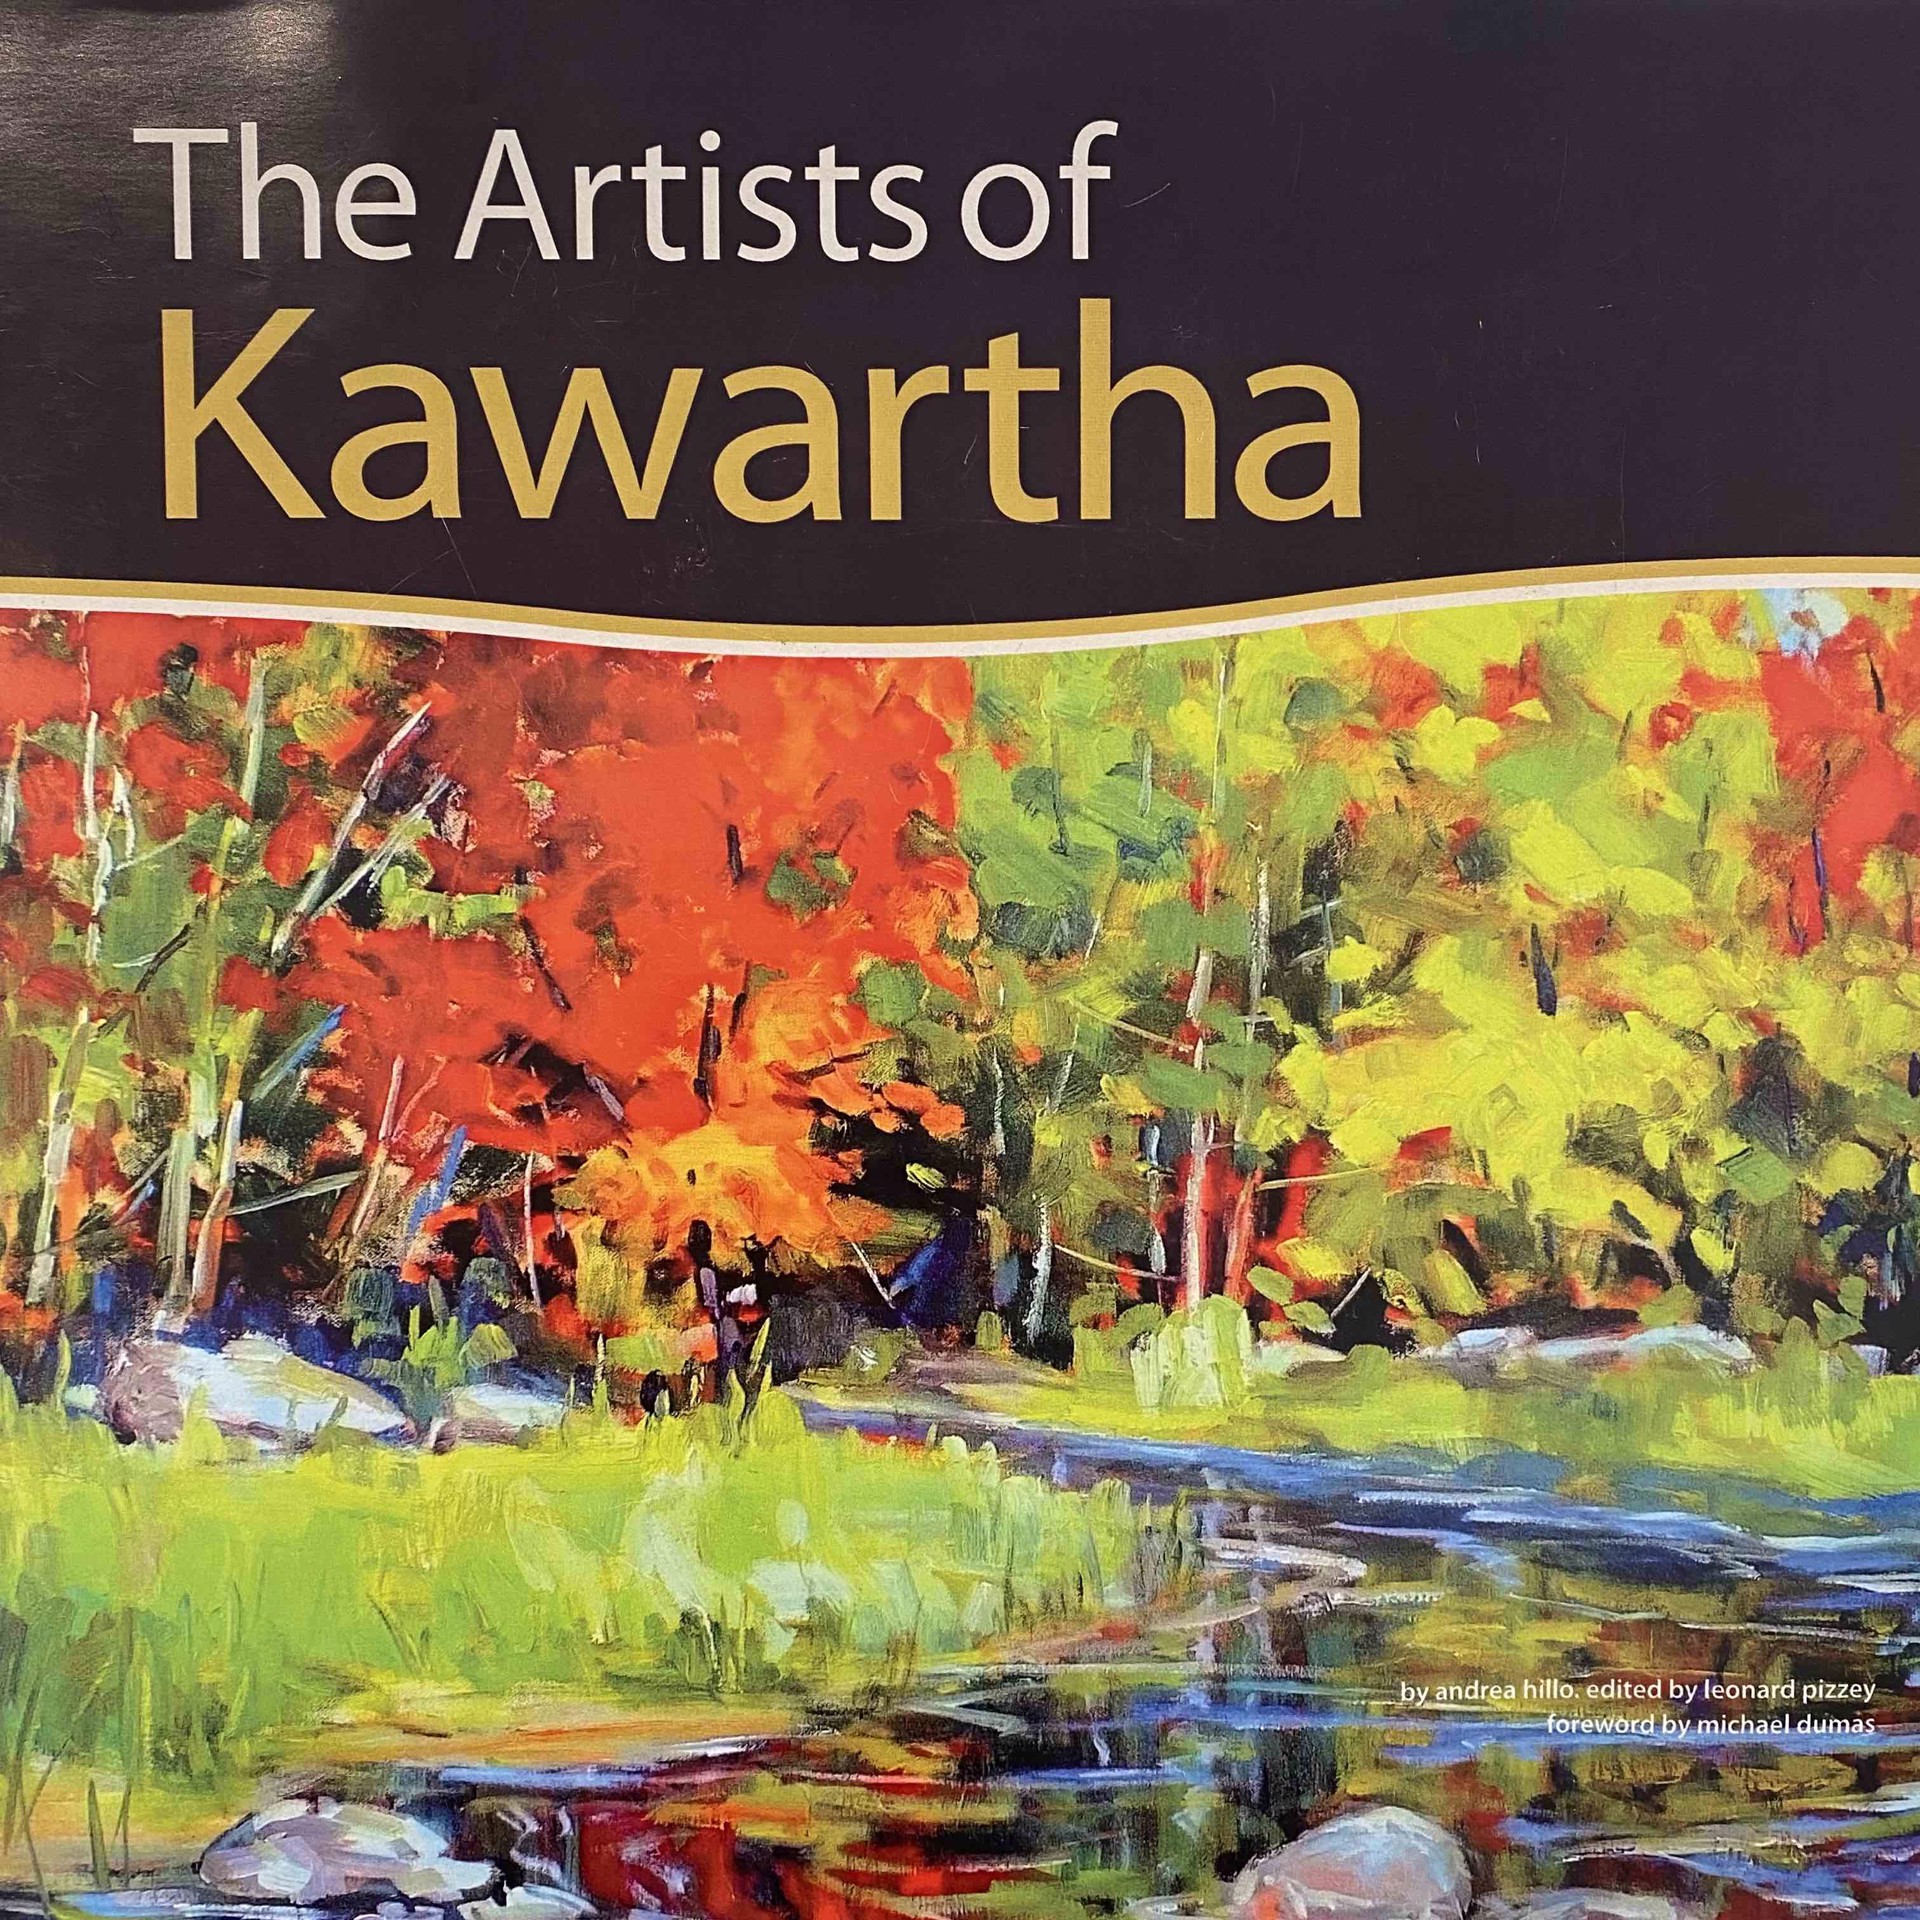 The Artists of Kawartha by Lucy Manley